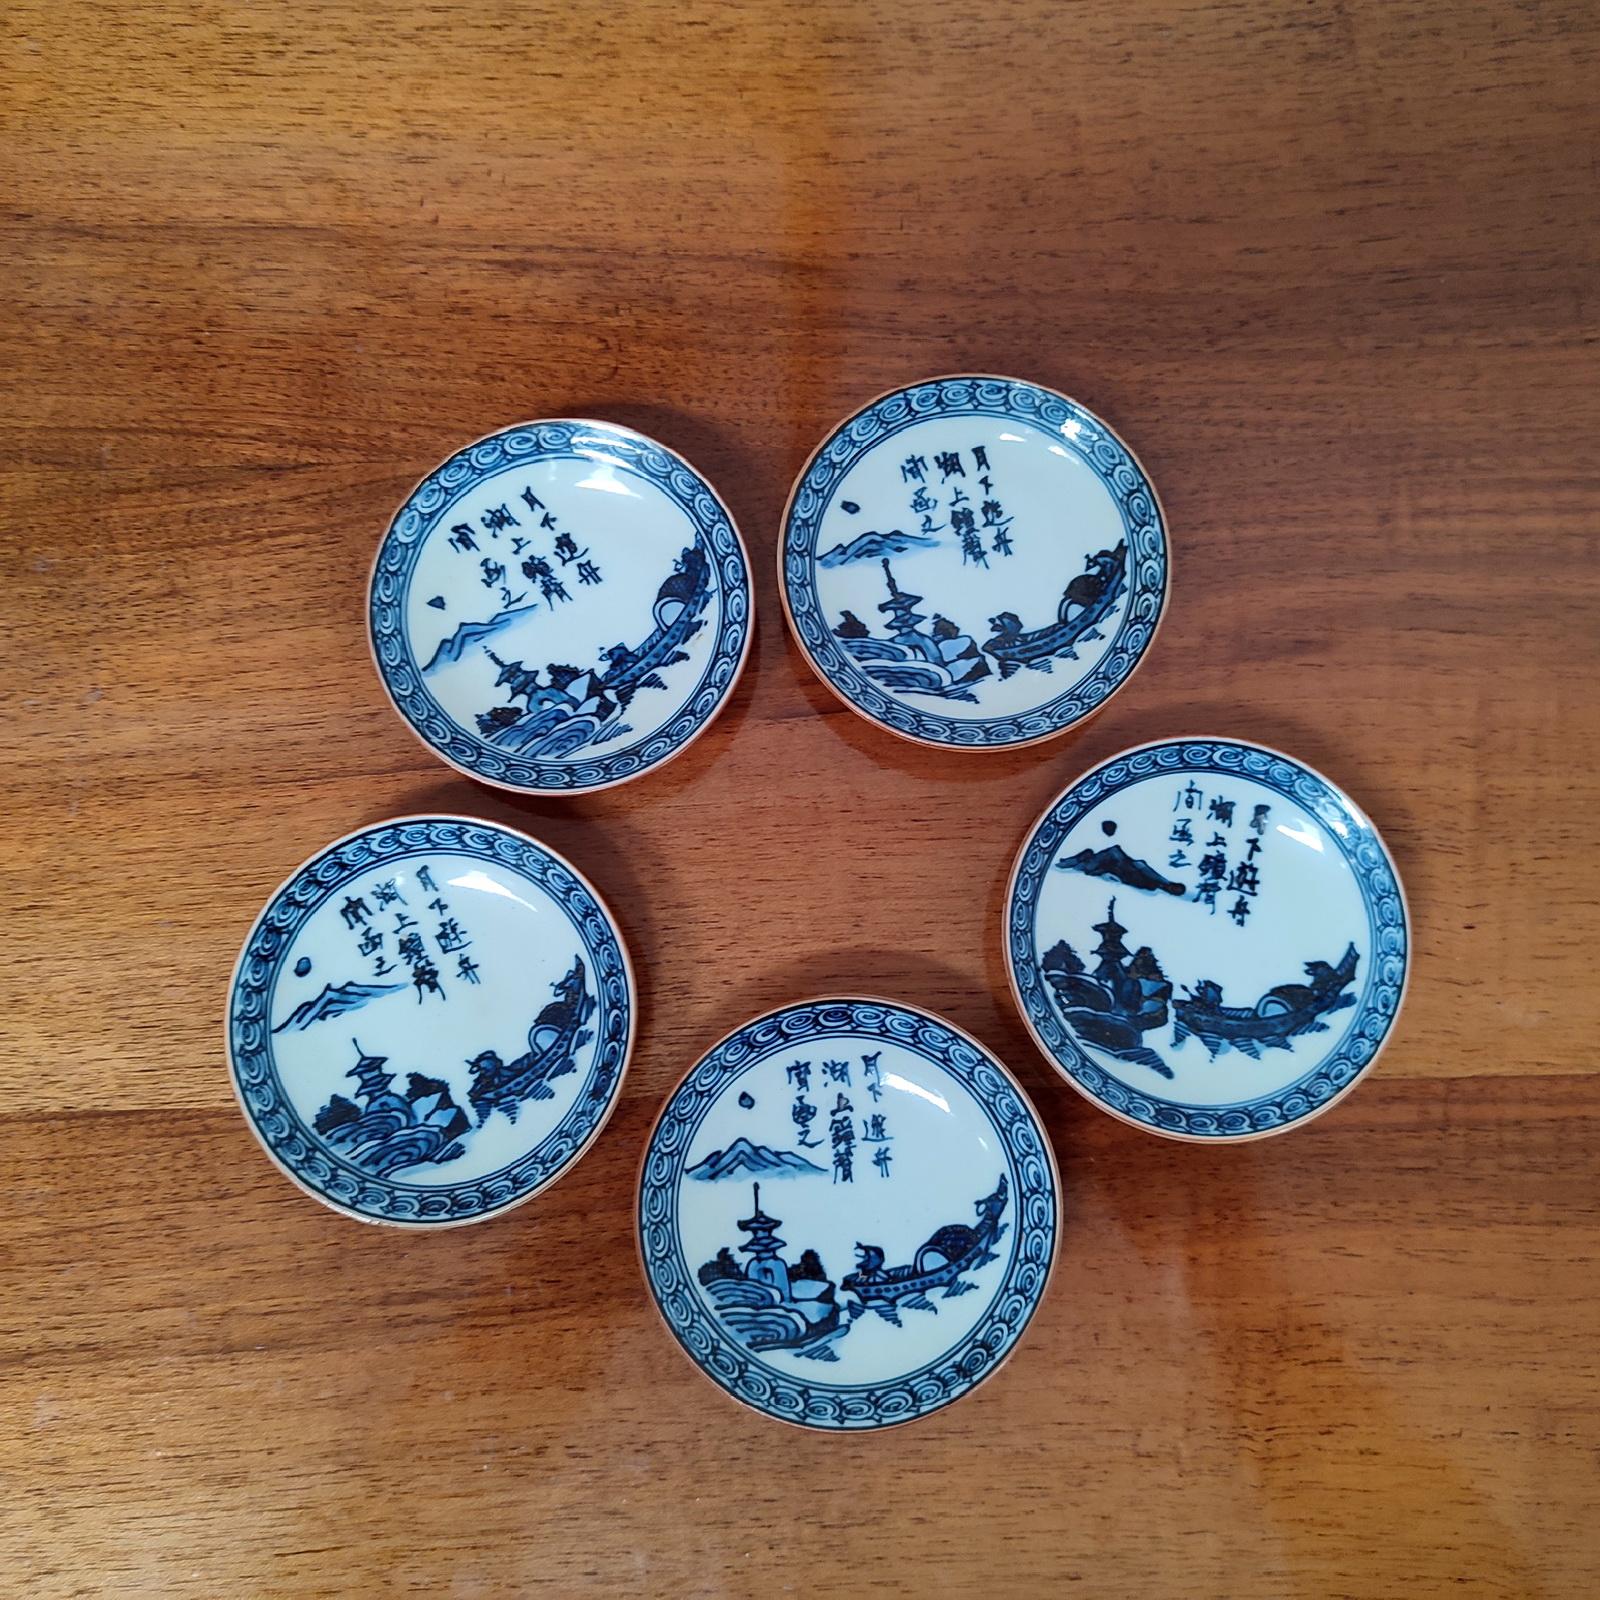 Set of five Chinese porcelain saucers, blue painted. Each wear a mark on the bottom, under the glaze.
In excellent condition.
Dimensions: Diameter 9,5 cm.